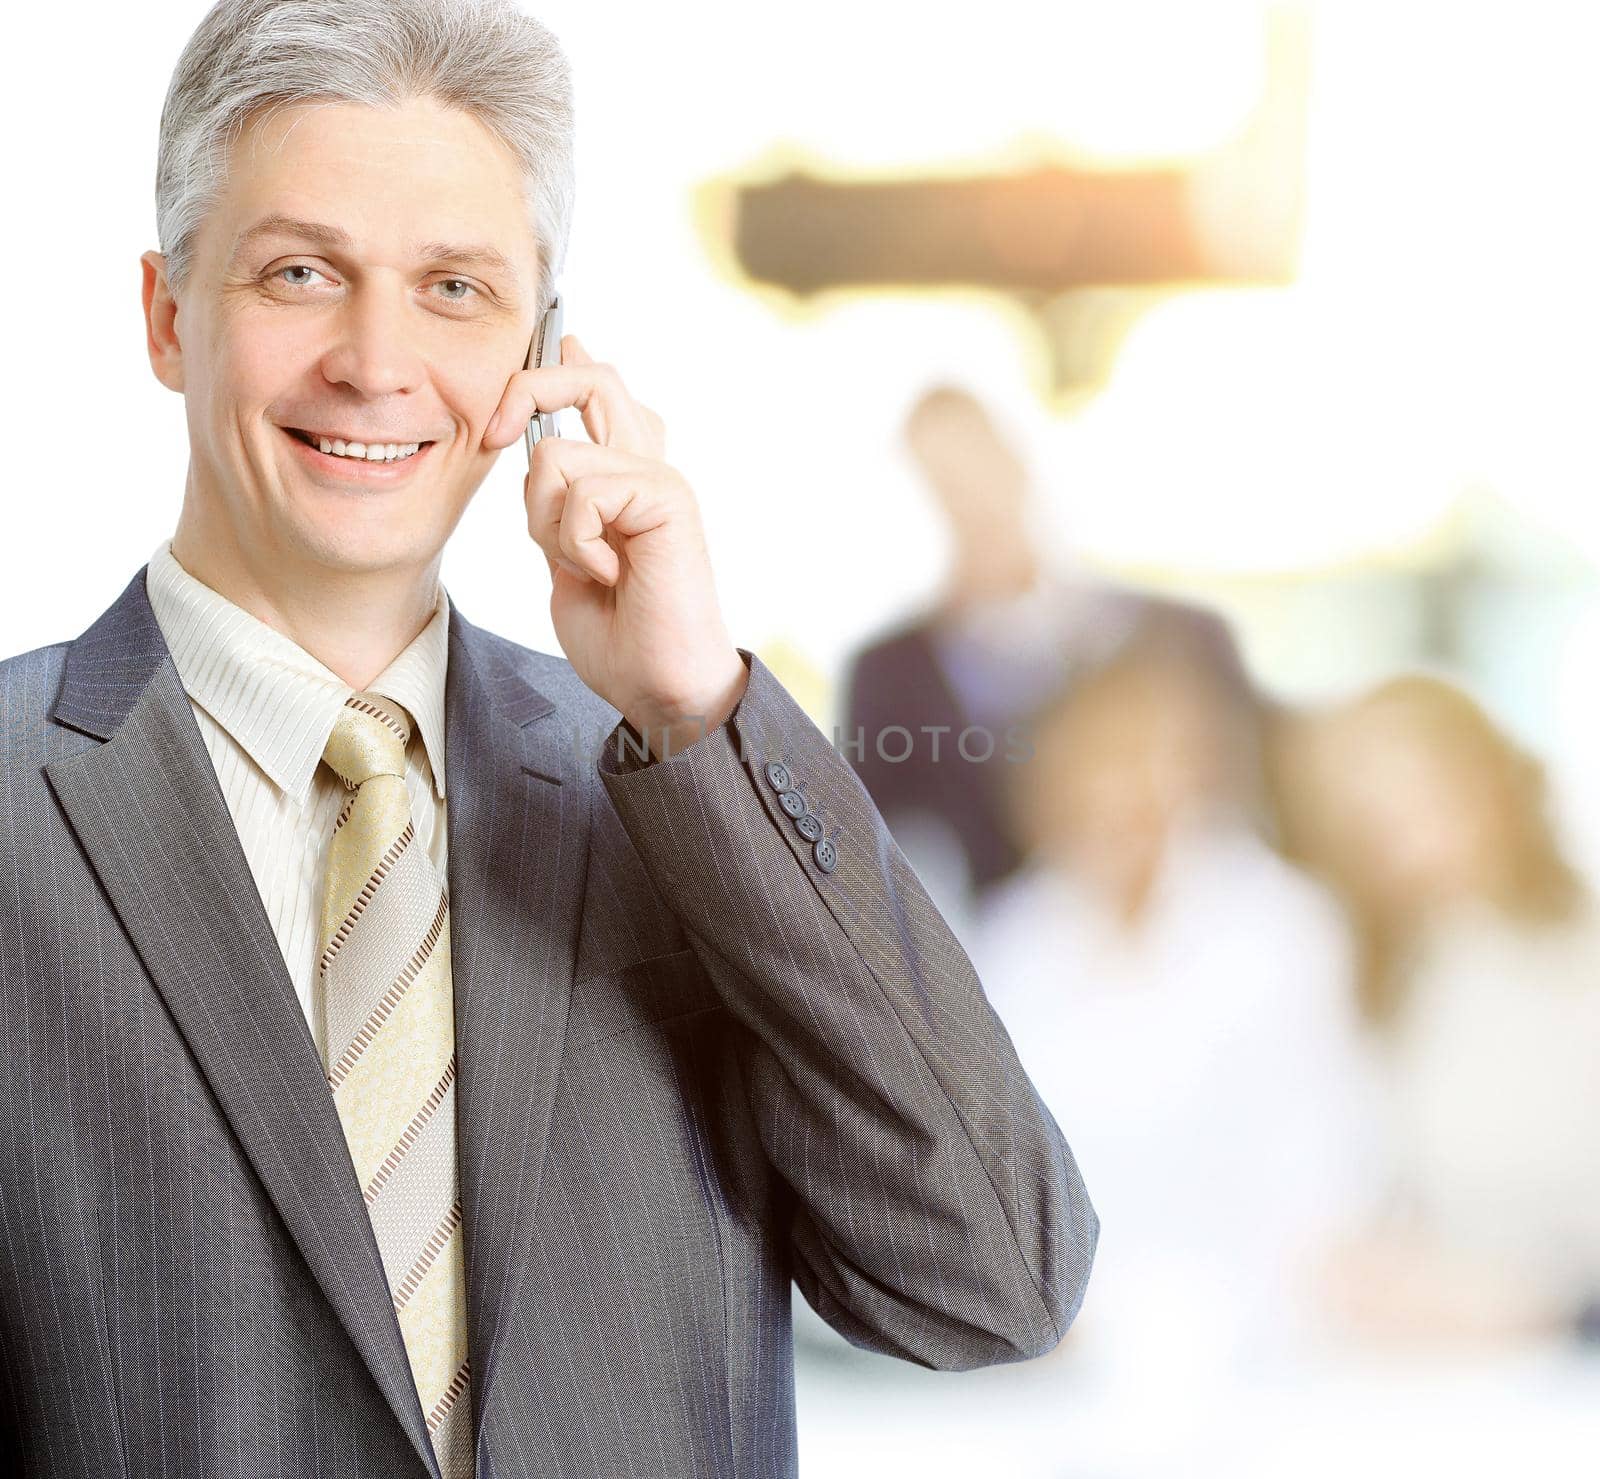 Adult businesswoman talking on the phone makes a deal, team work in the background mode by SmartPhotoLab